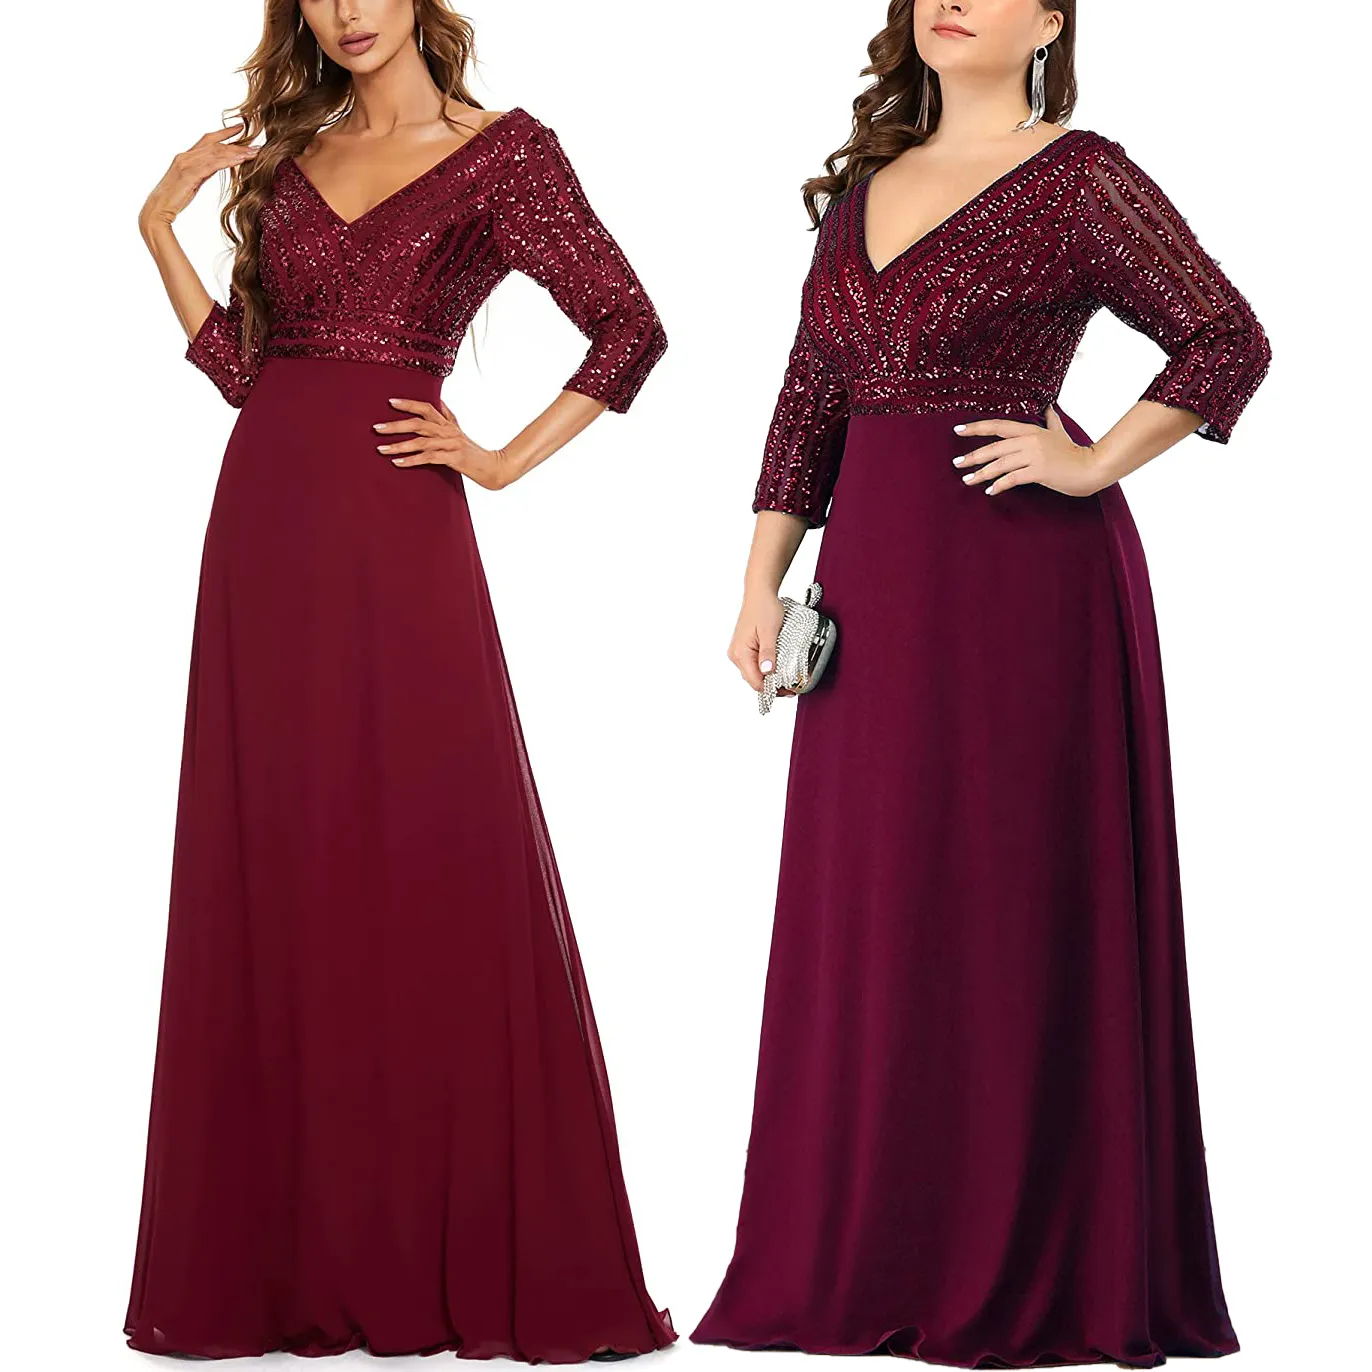 Plus Size Women's Sequin Sexy V Neck Chiffon Cocktail Dinner Formal Elegant Prom Long Gown Ball Evening Party Dress For Fat Lady